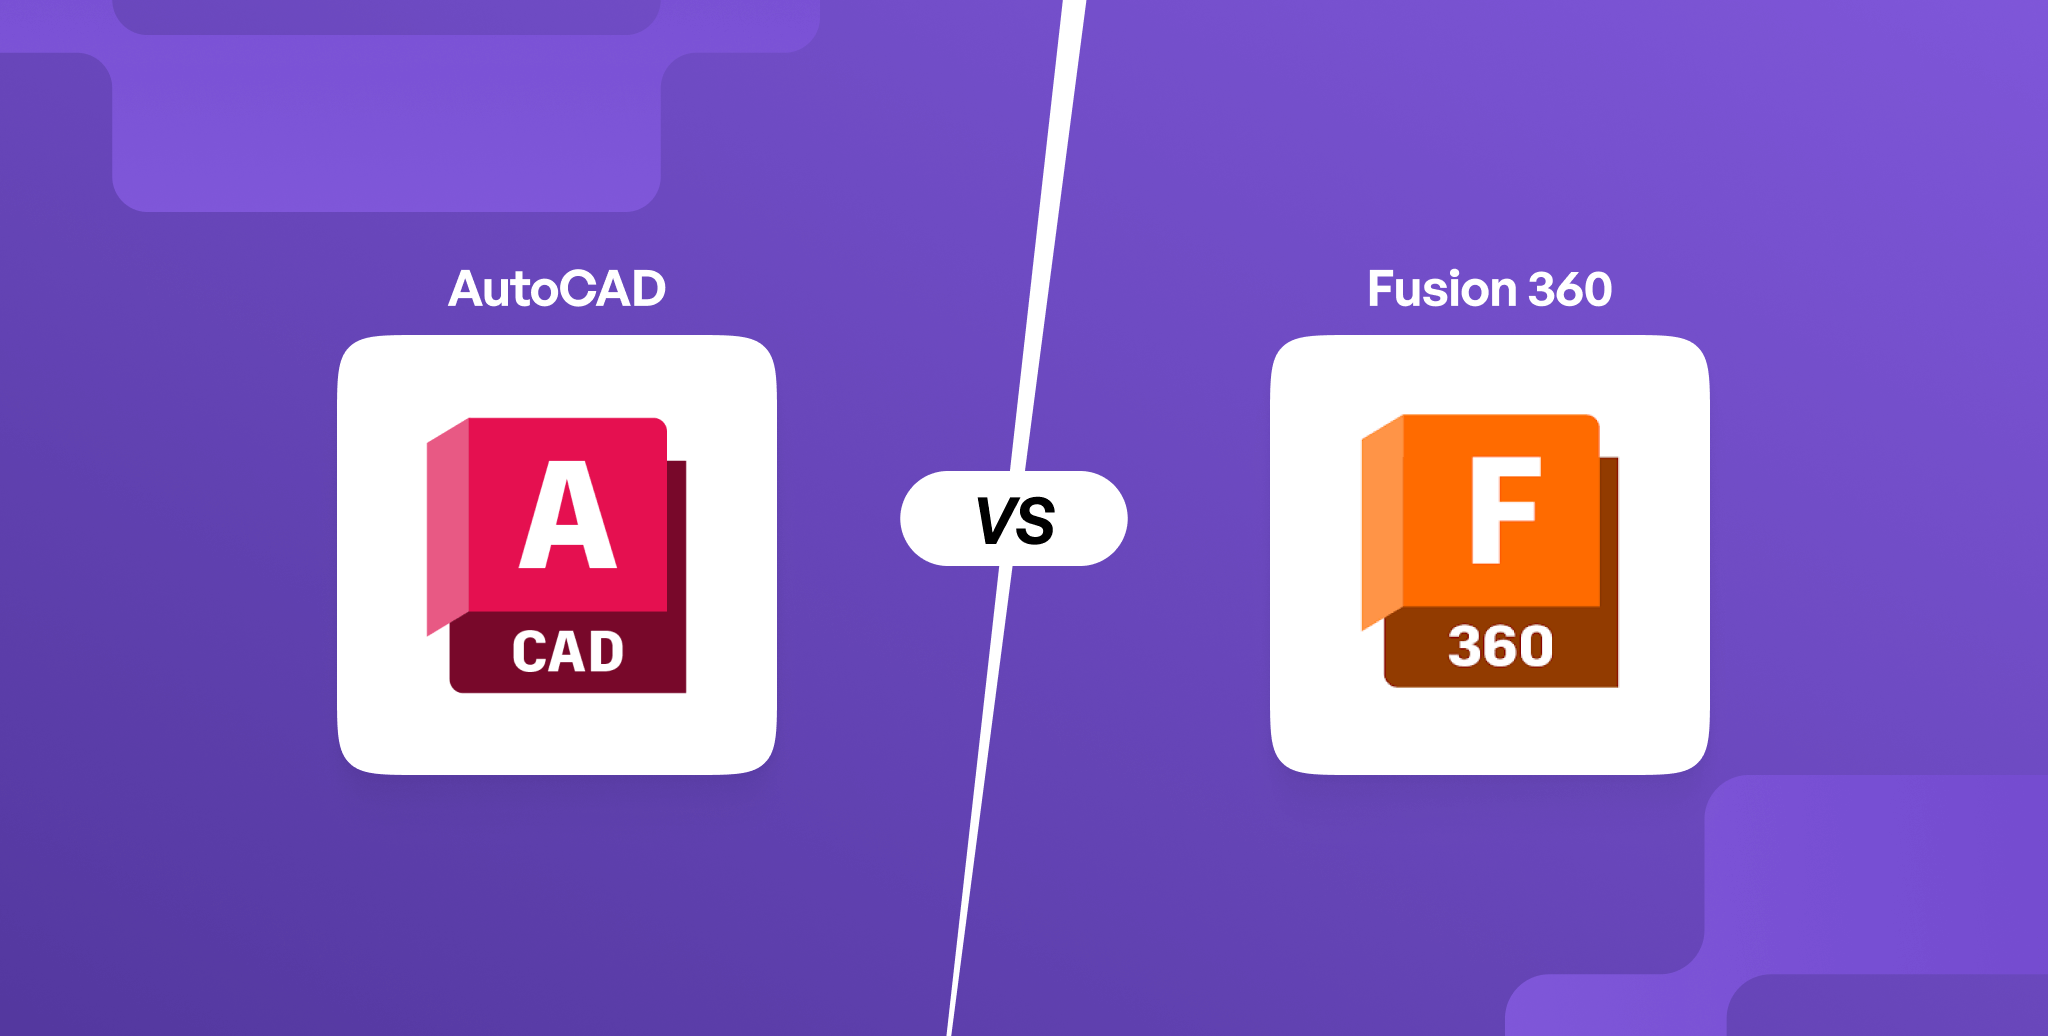 Why is Fusion 360 better than AutoCAD?